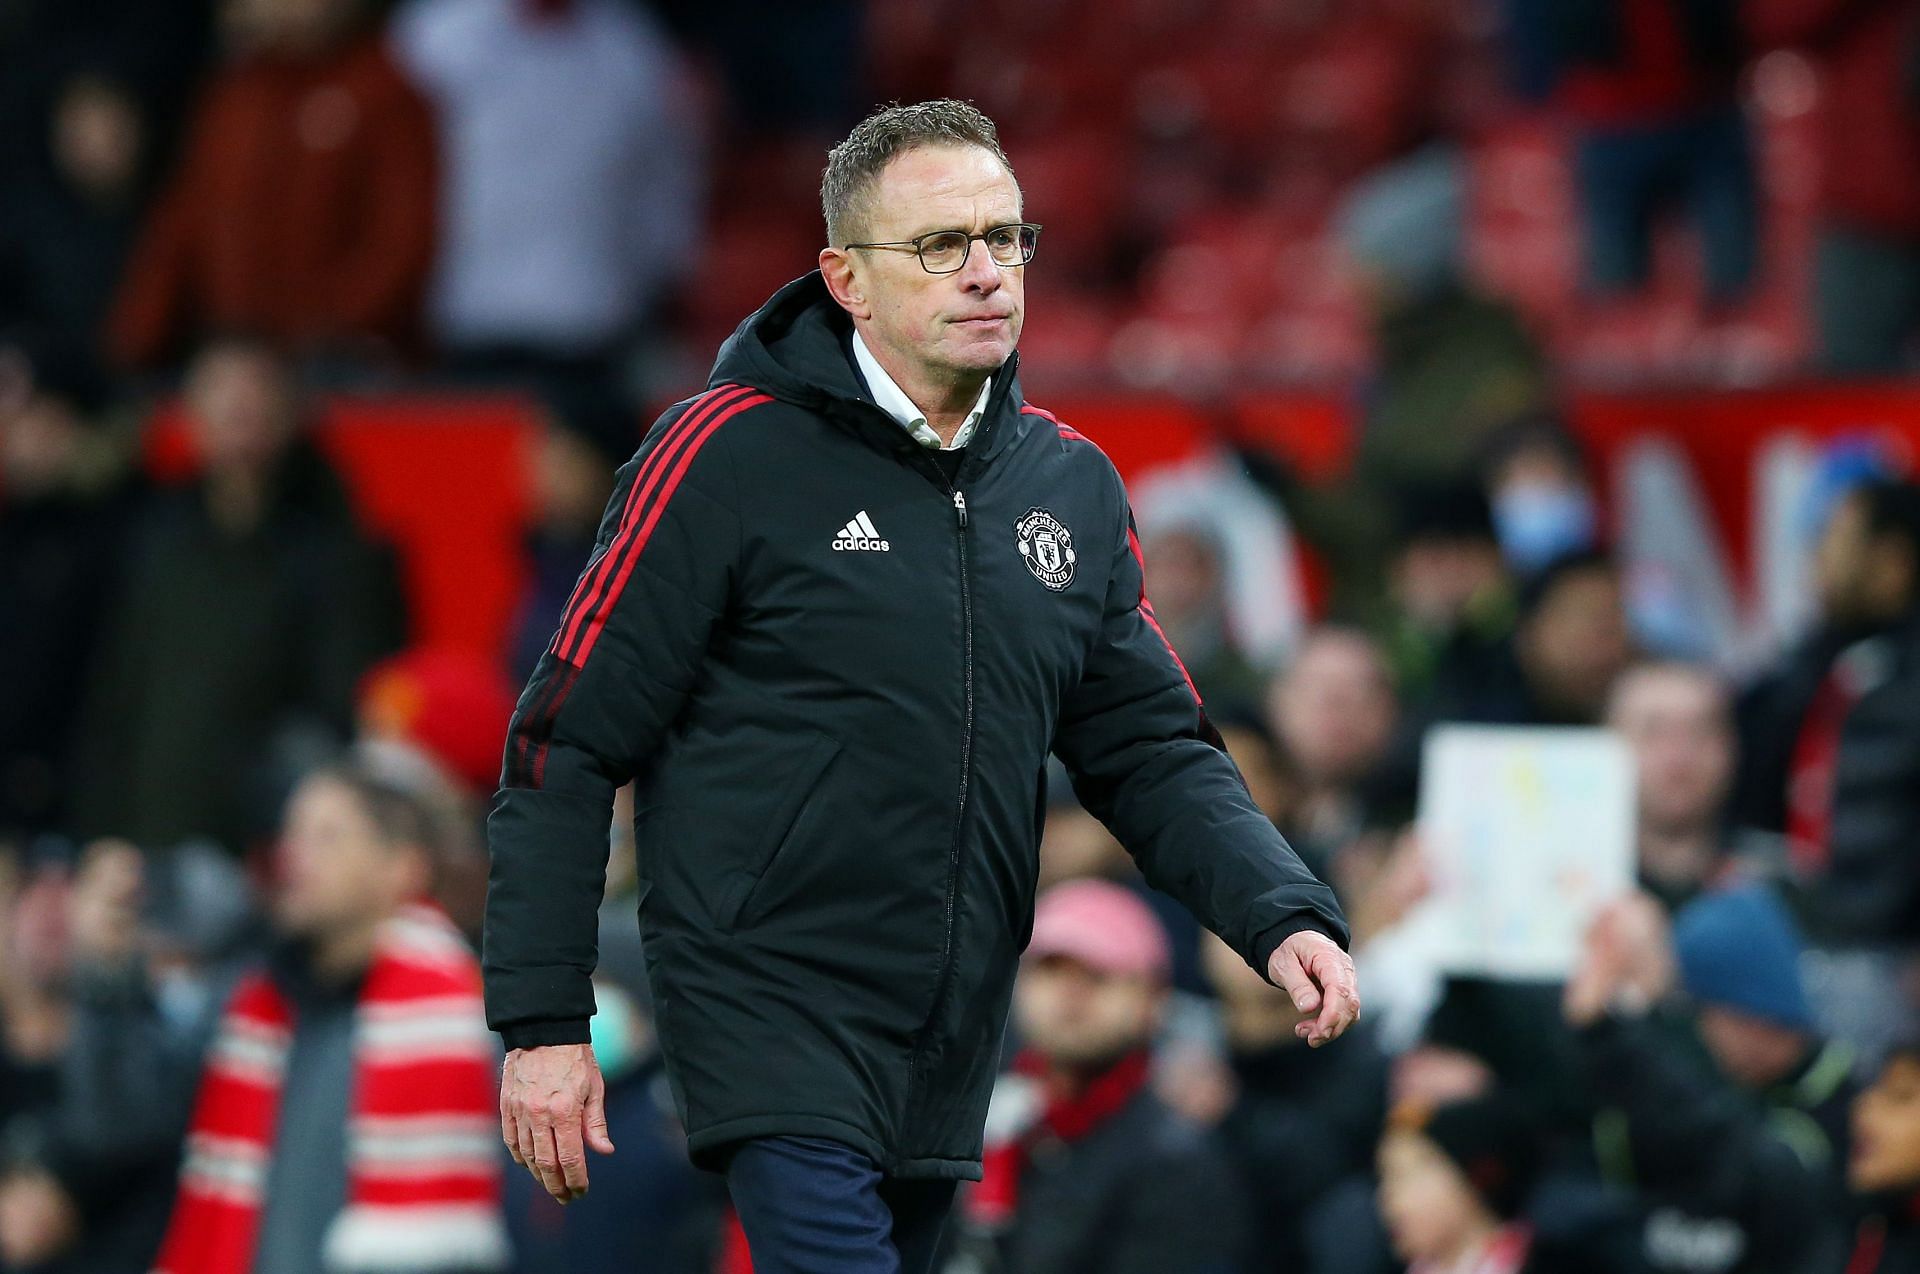 Manchester United manager Ralf Rangnick. (Photo by Alex Livesey/Getty Images)